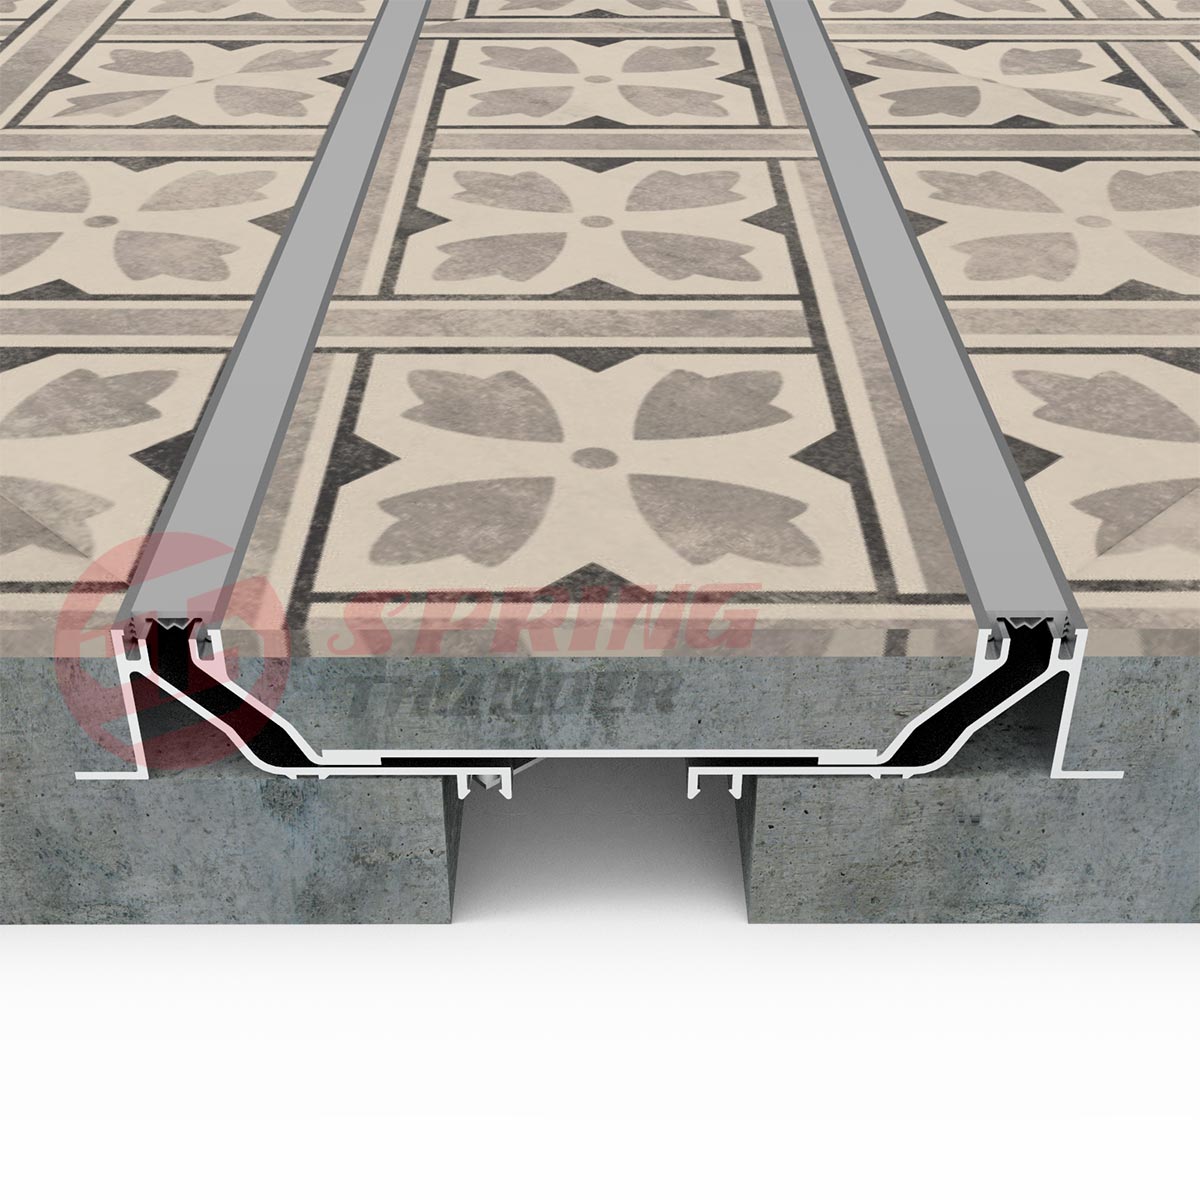 Flush Seismic Floor to floor Expansion Joint with rubber strip 1